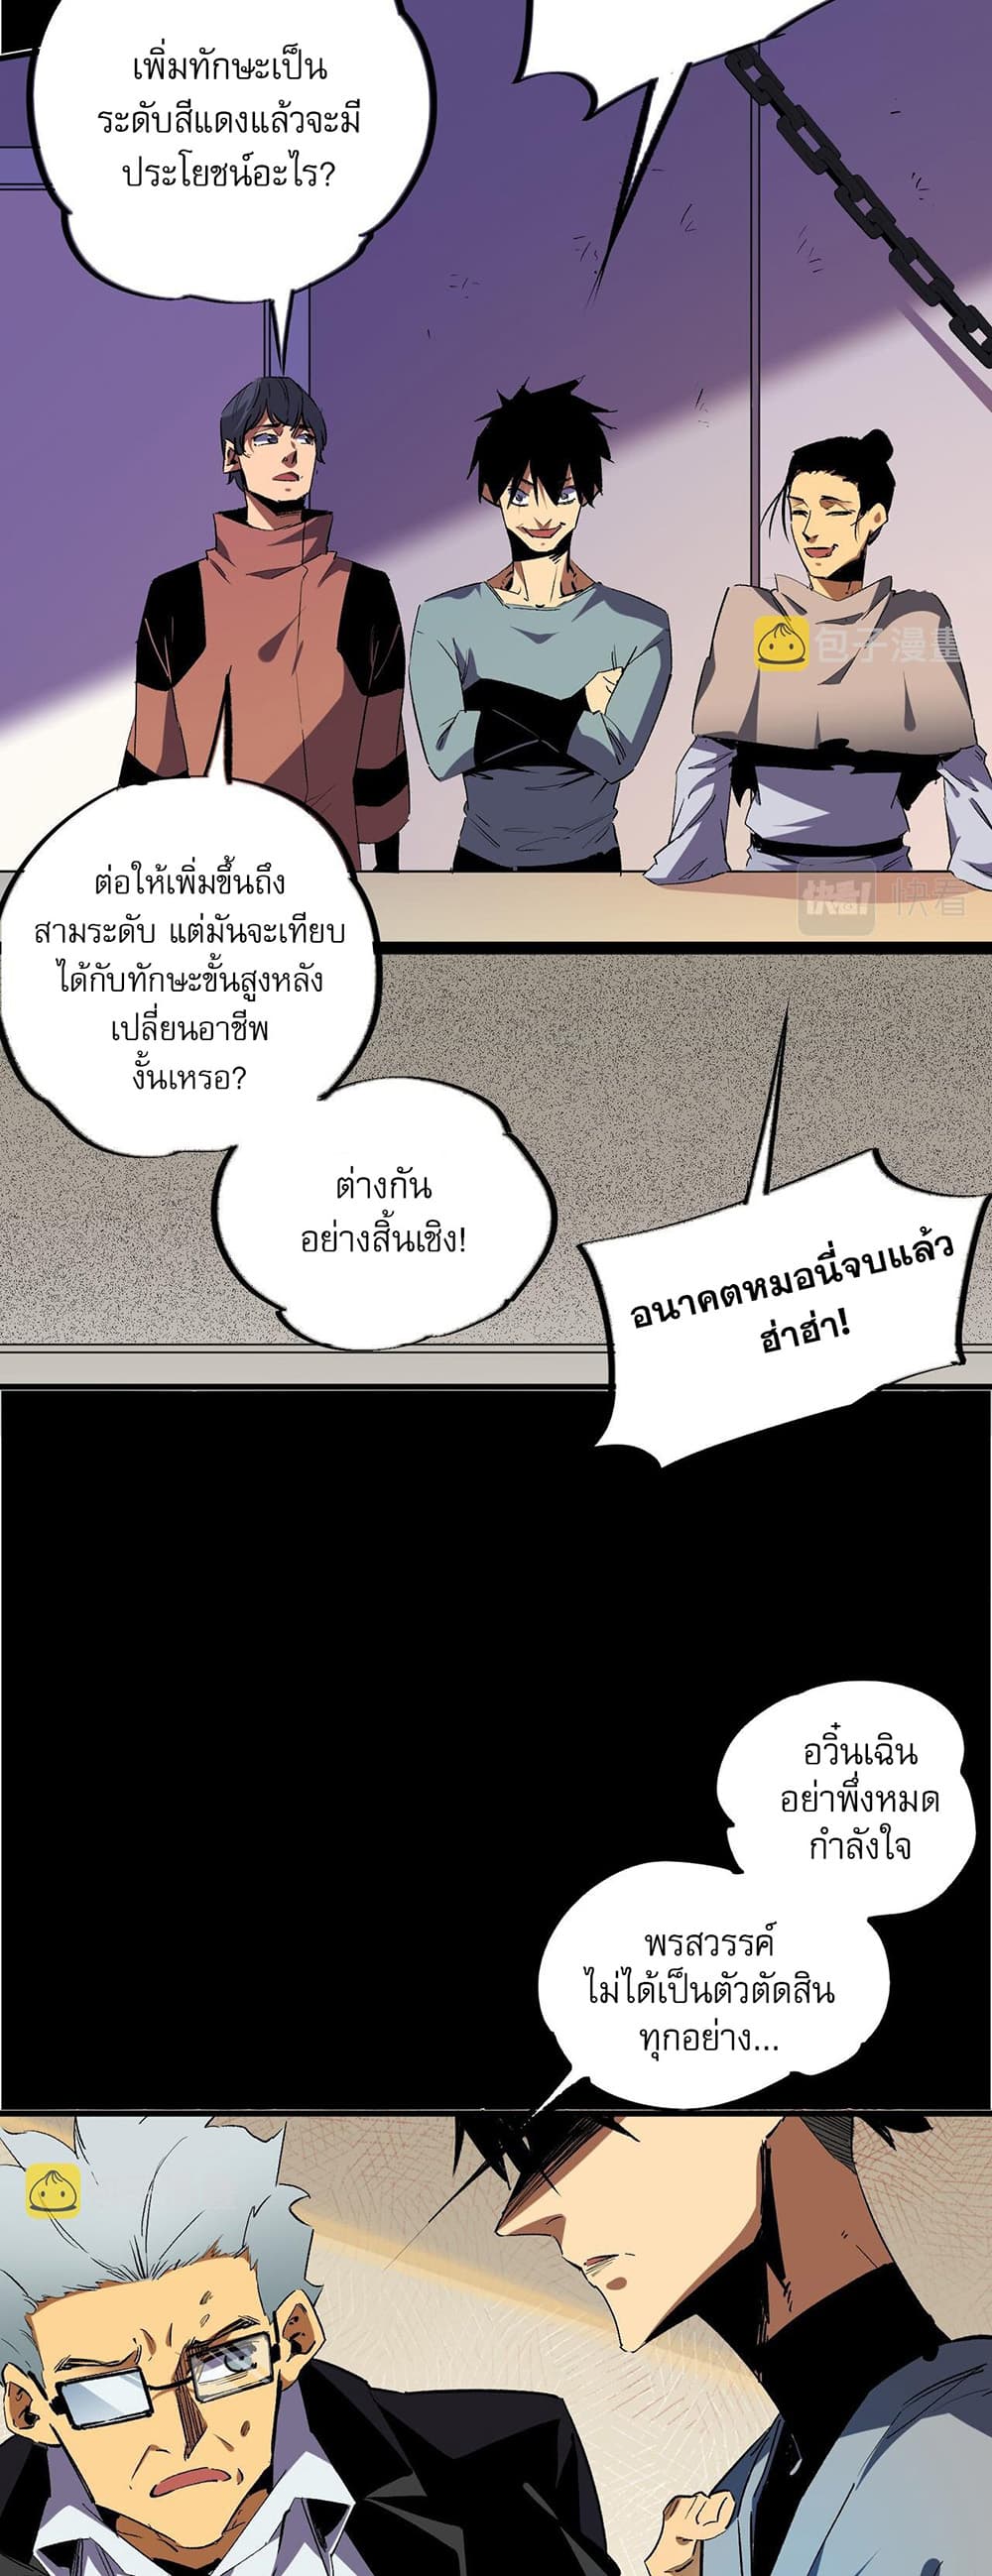 Job Changing for the Entire Population: The Jobless Me Will Terminate the Gods ฉันคือผู้เล่นไร้อาชีพที่สังหารเหล่าเทพ 9-9